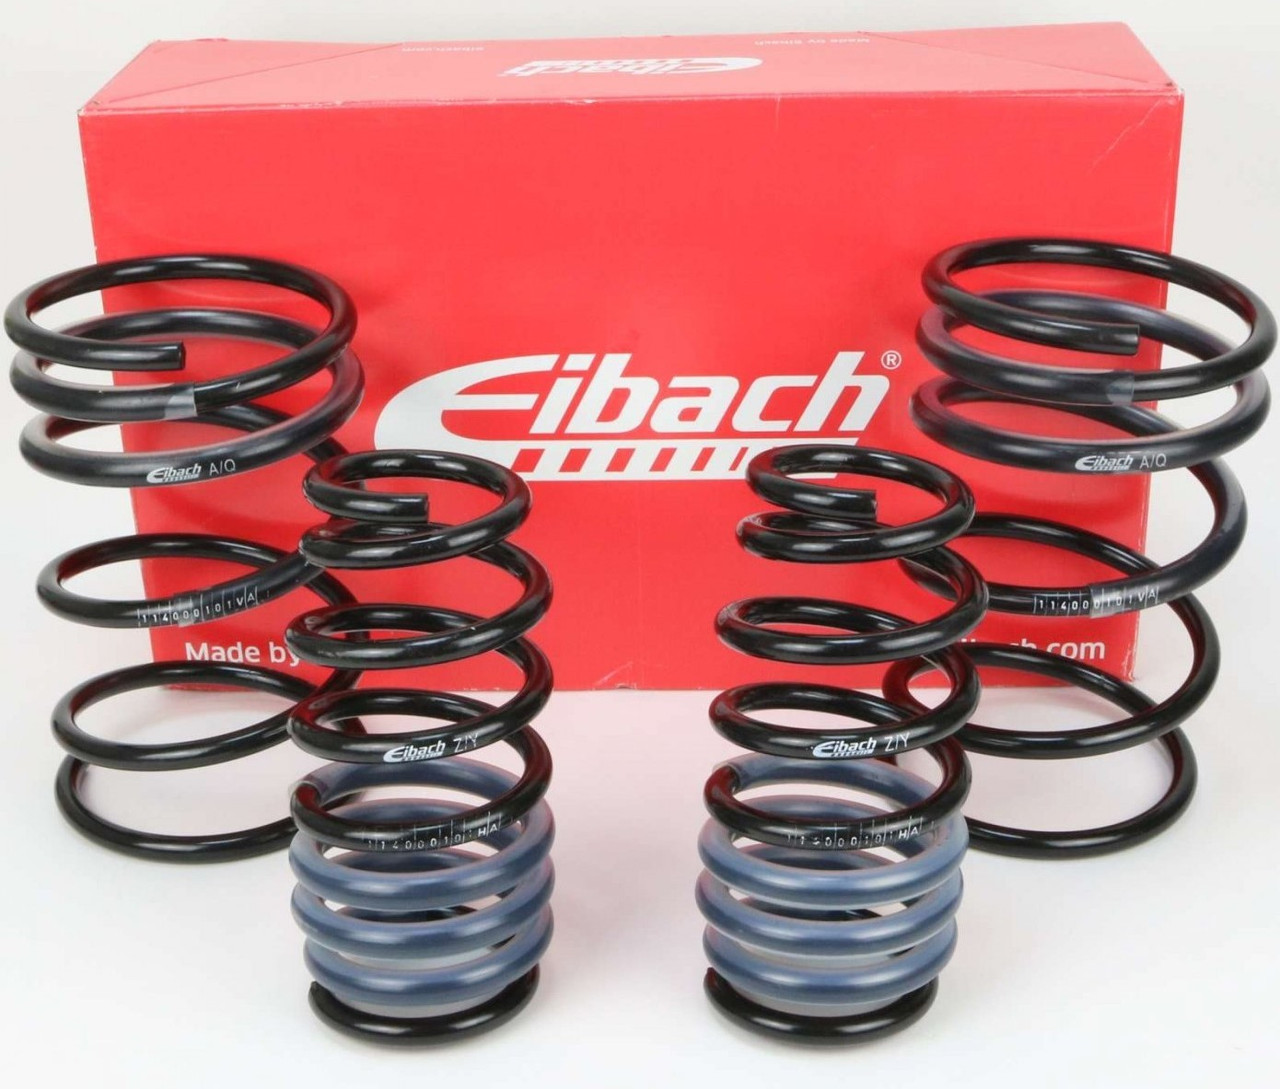 Eibach Lowering Springs pro-Kit for Vauxhall Calibra 30/30mm